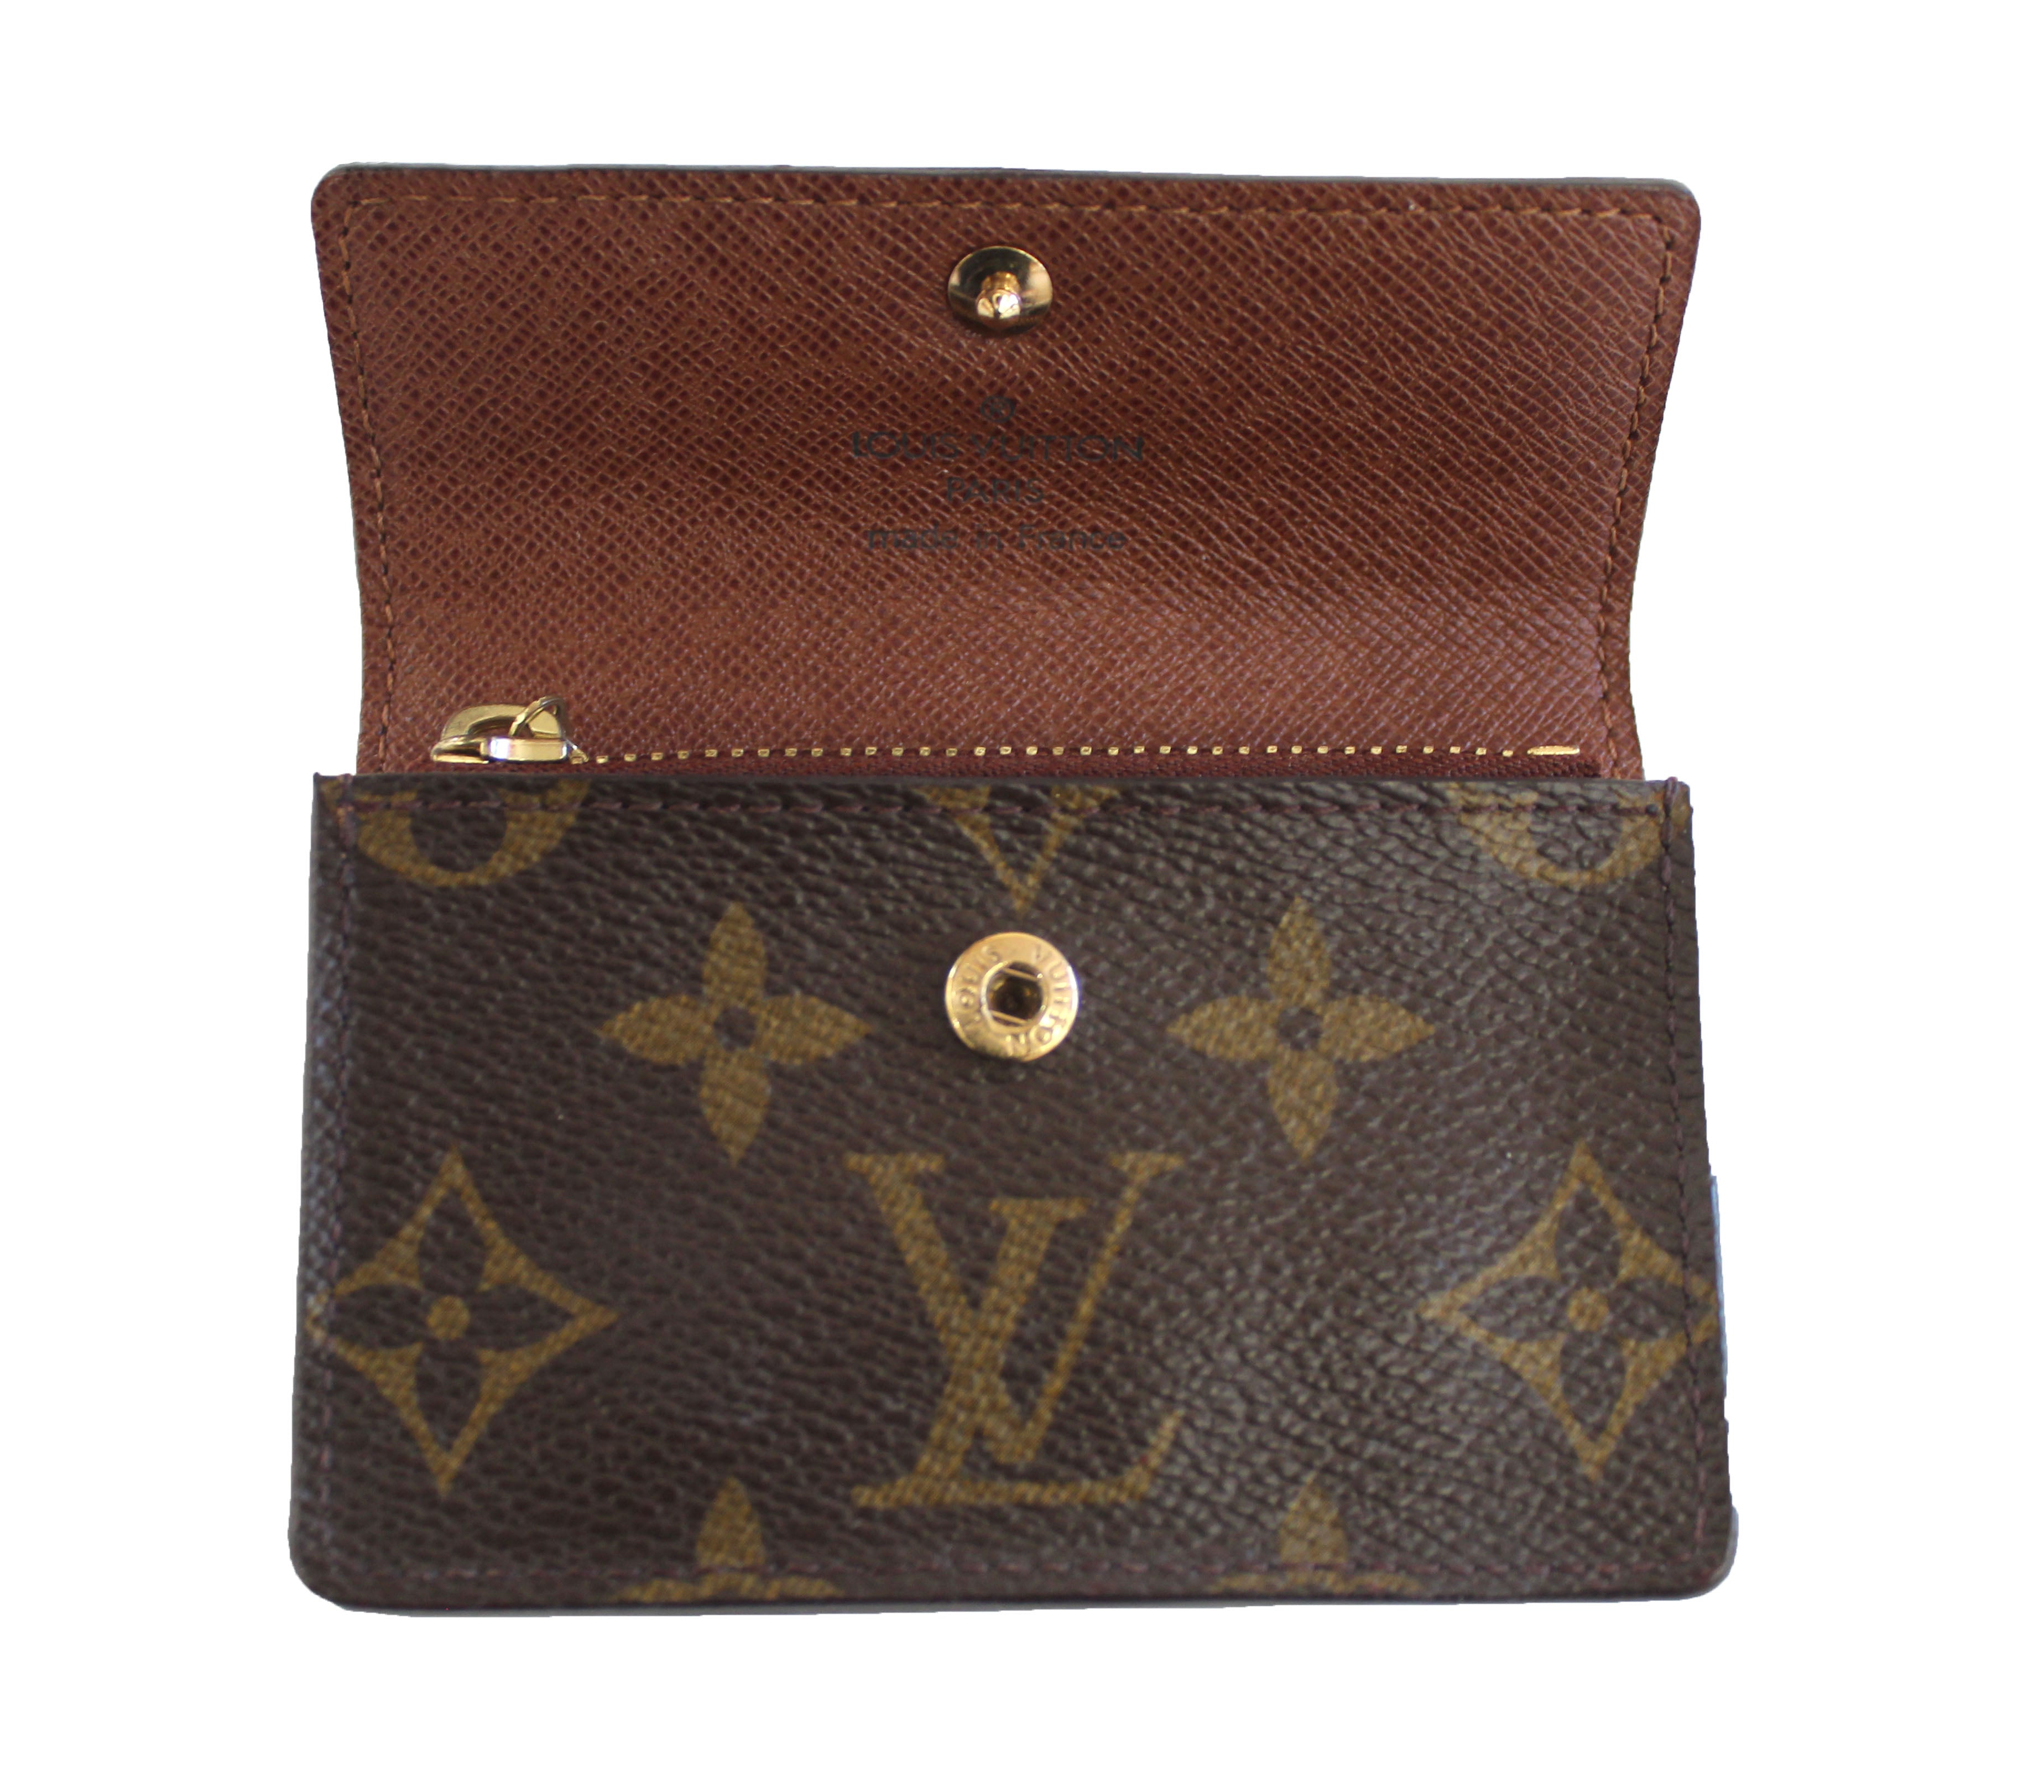 Authentic Louis Vuitton Monogram Canvas Small Card Holder Coin